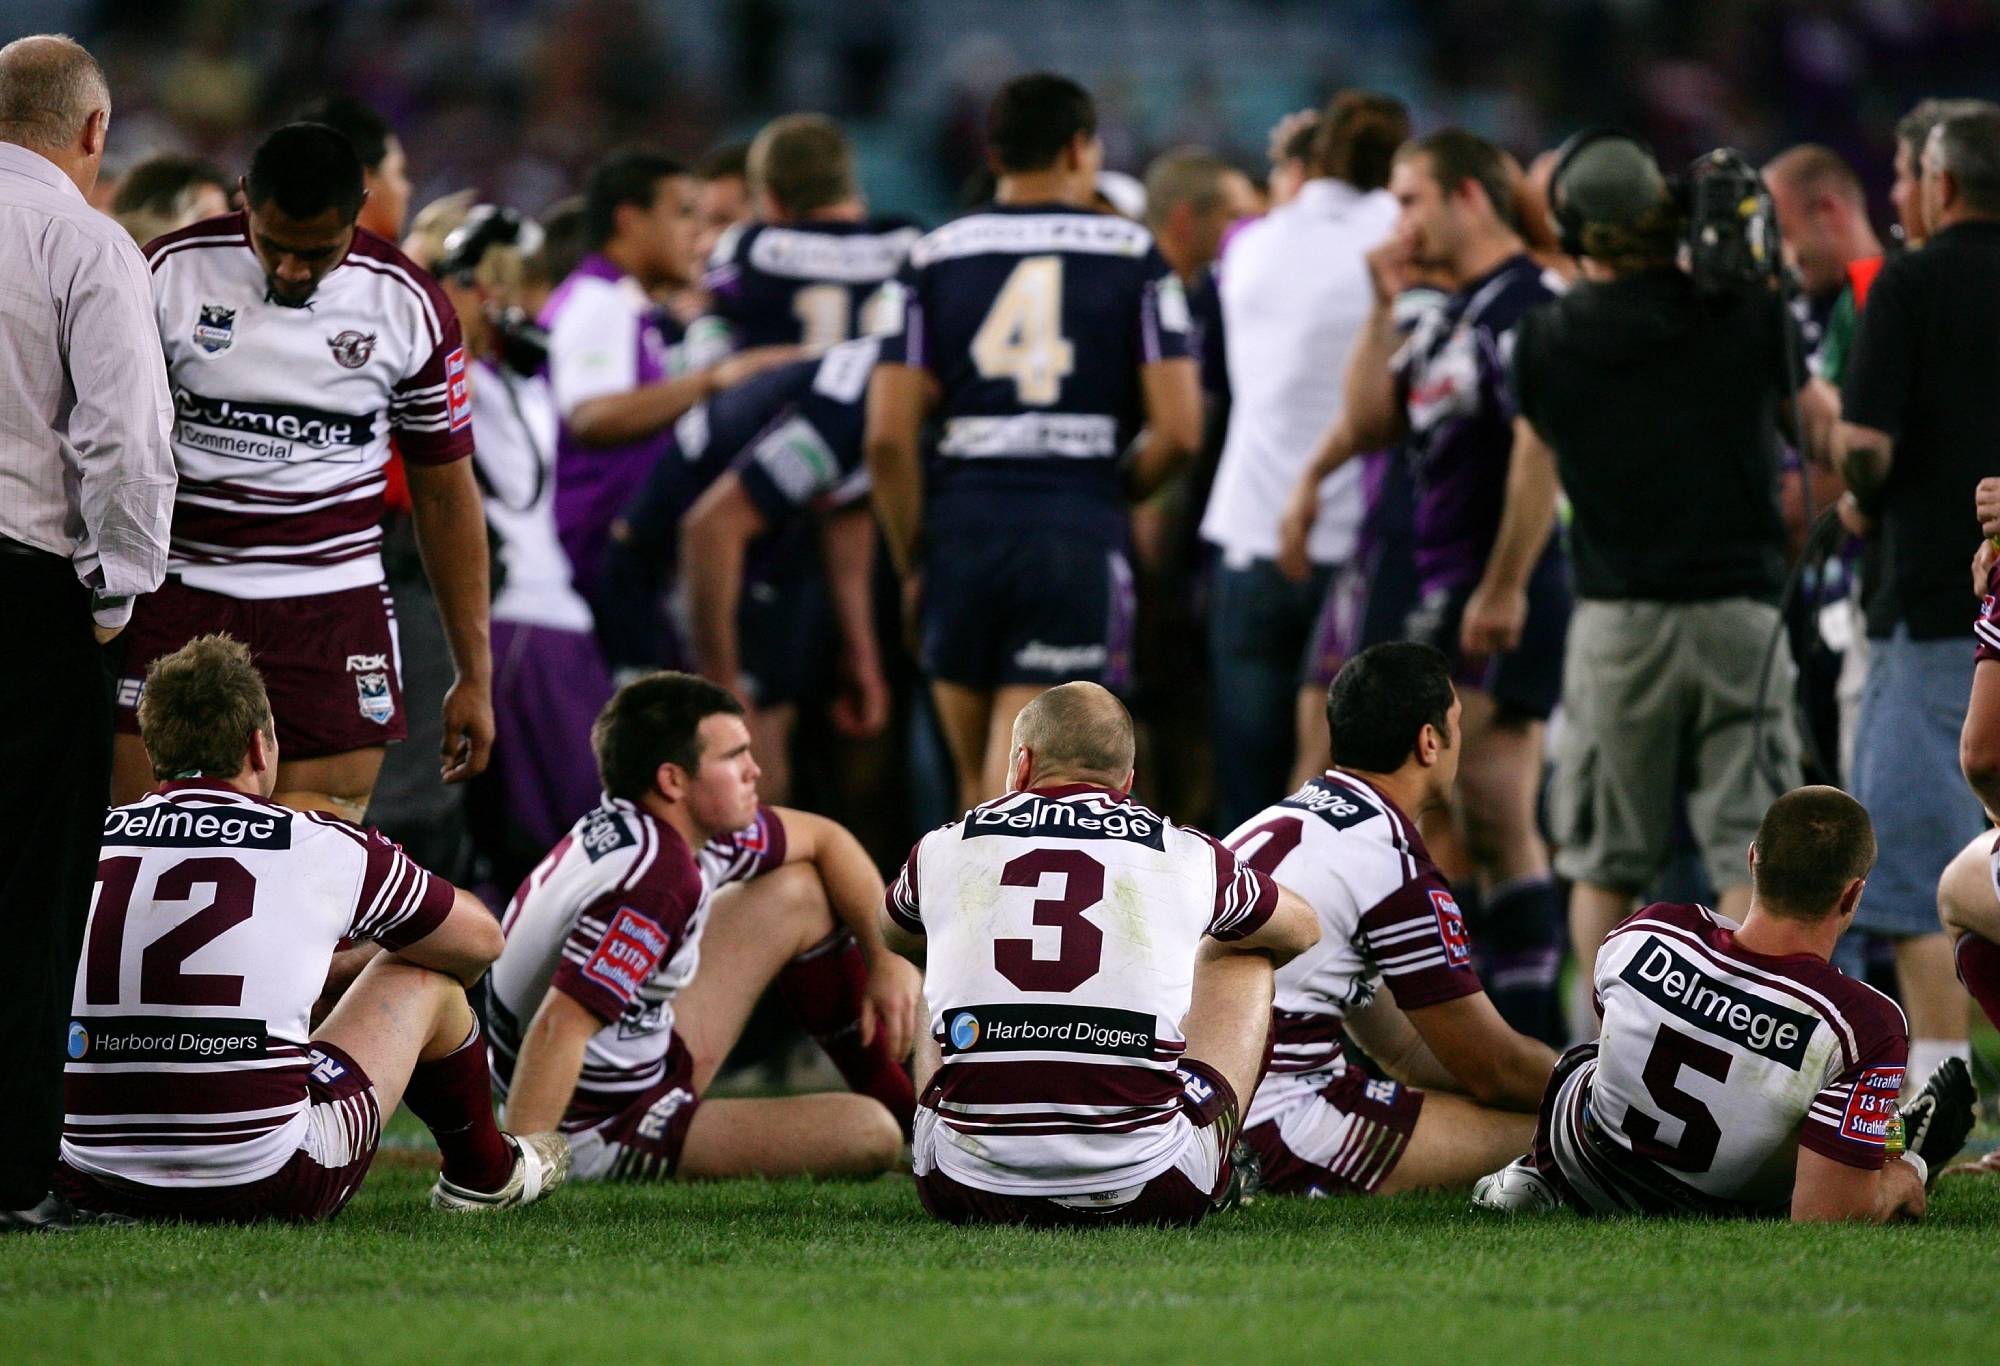 SYDNEY, AUSTRALIA - SEPTEMBER 30:  Sea Eagles players look dejected after the NRL Grand Final match between the Melbourne Storm and the Manly Warringah Sea Eagles at Telstra Stadium September 30, 2007 in Sydney, Australia.  (Photo by Matt King/Getty Images)